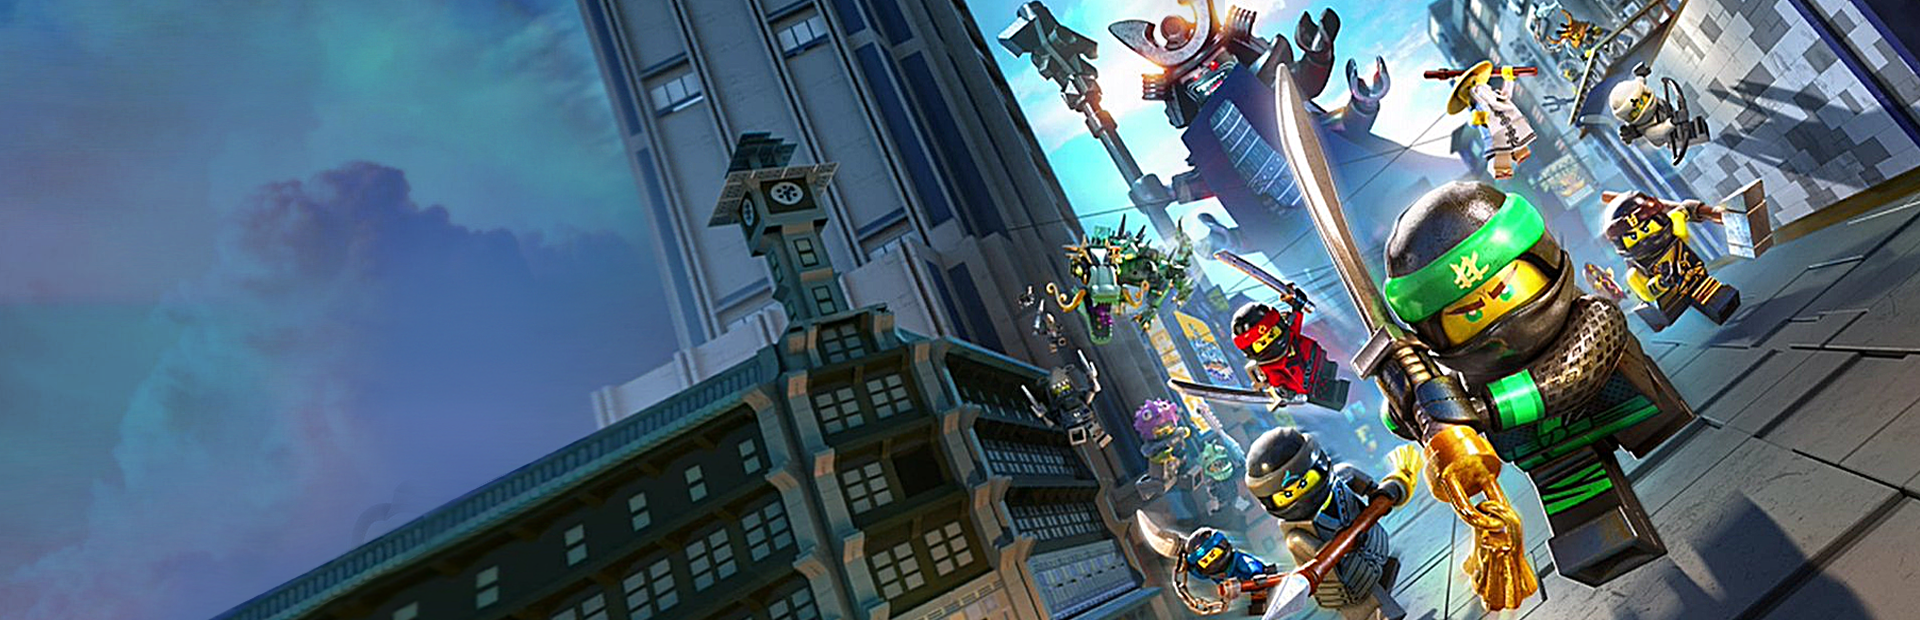 The LEGO Ninjago Movie Video Game Free Download » STEAMUNLOCKED